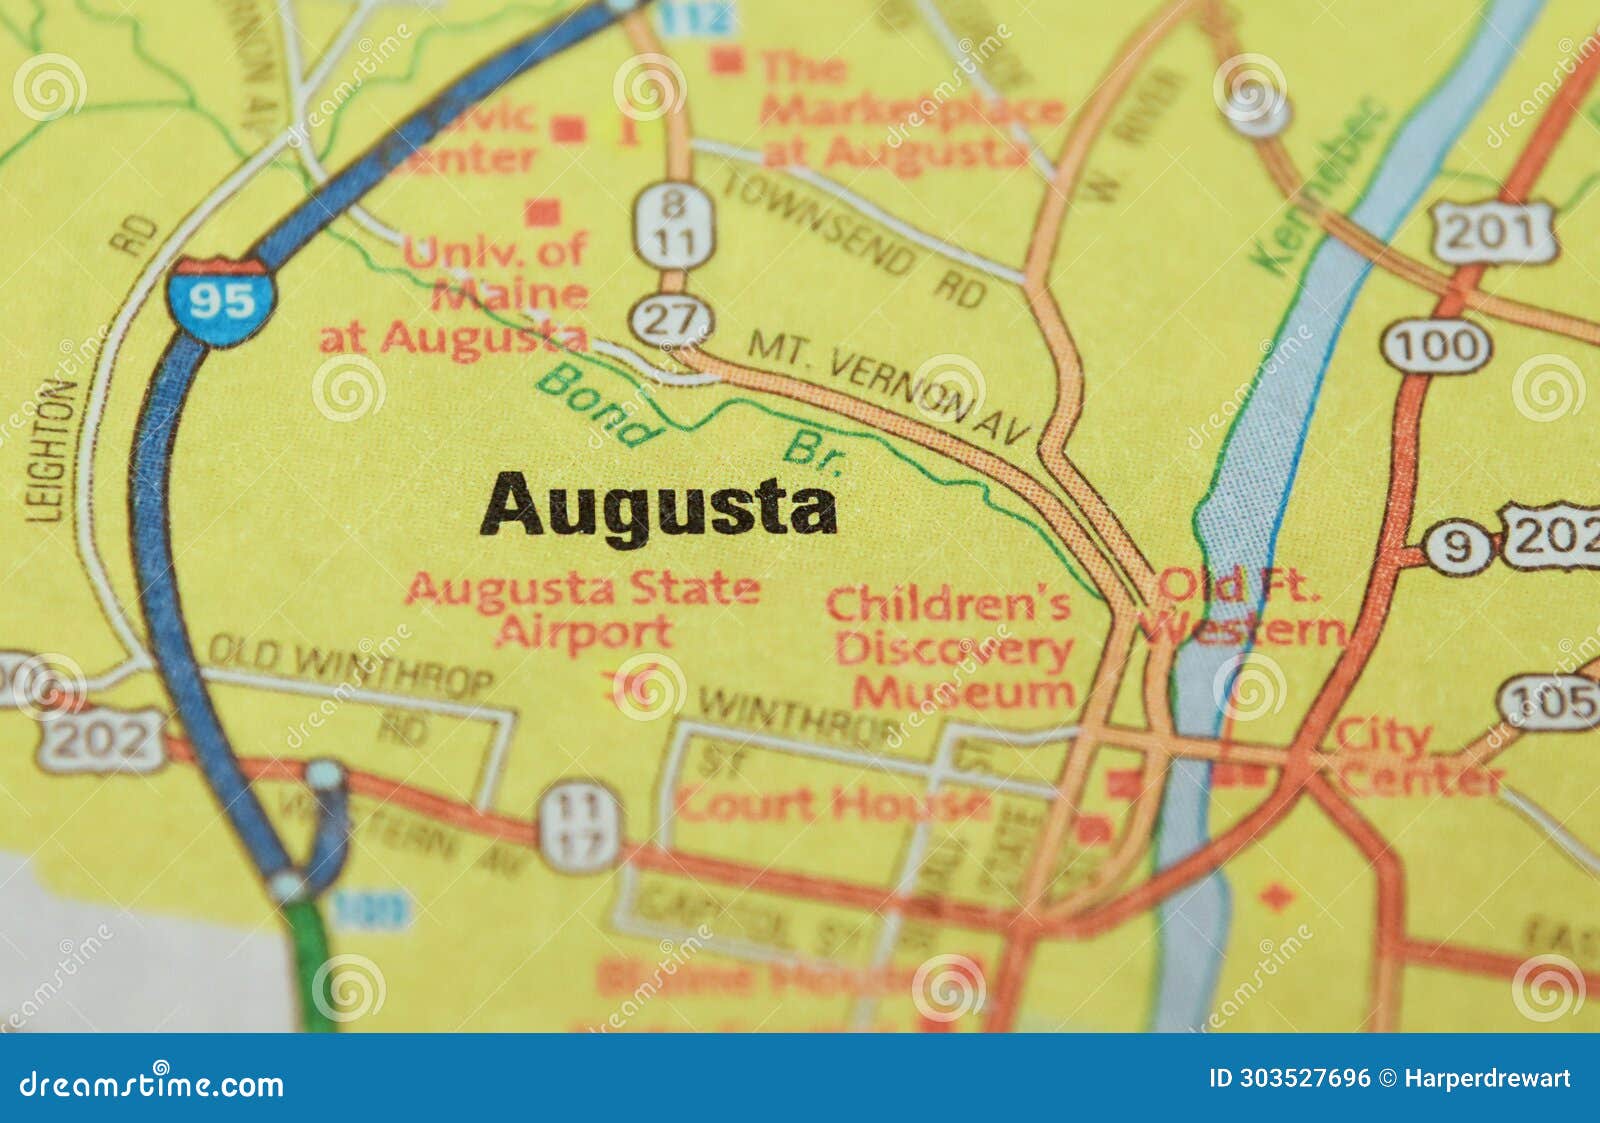 map image of augusta, maine